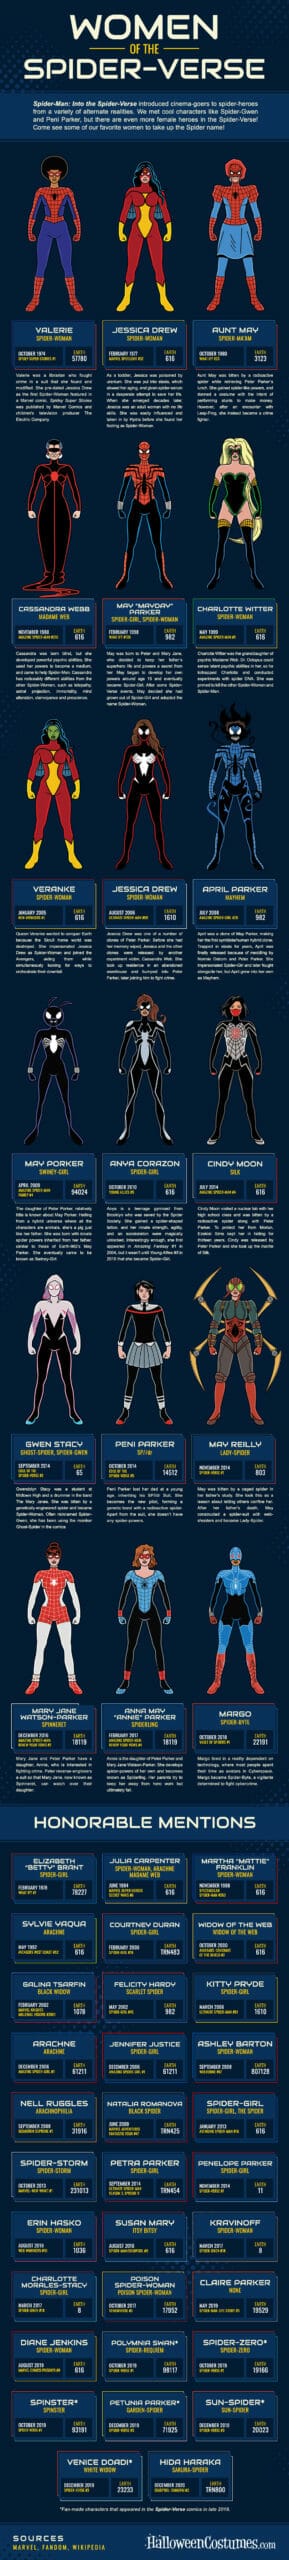 Women of the Spider-Verse [infographic]